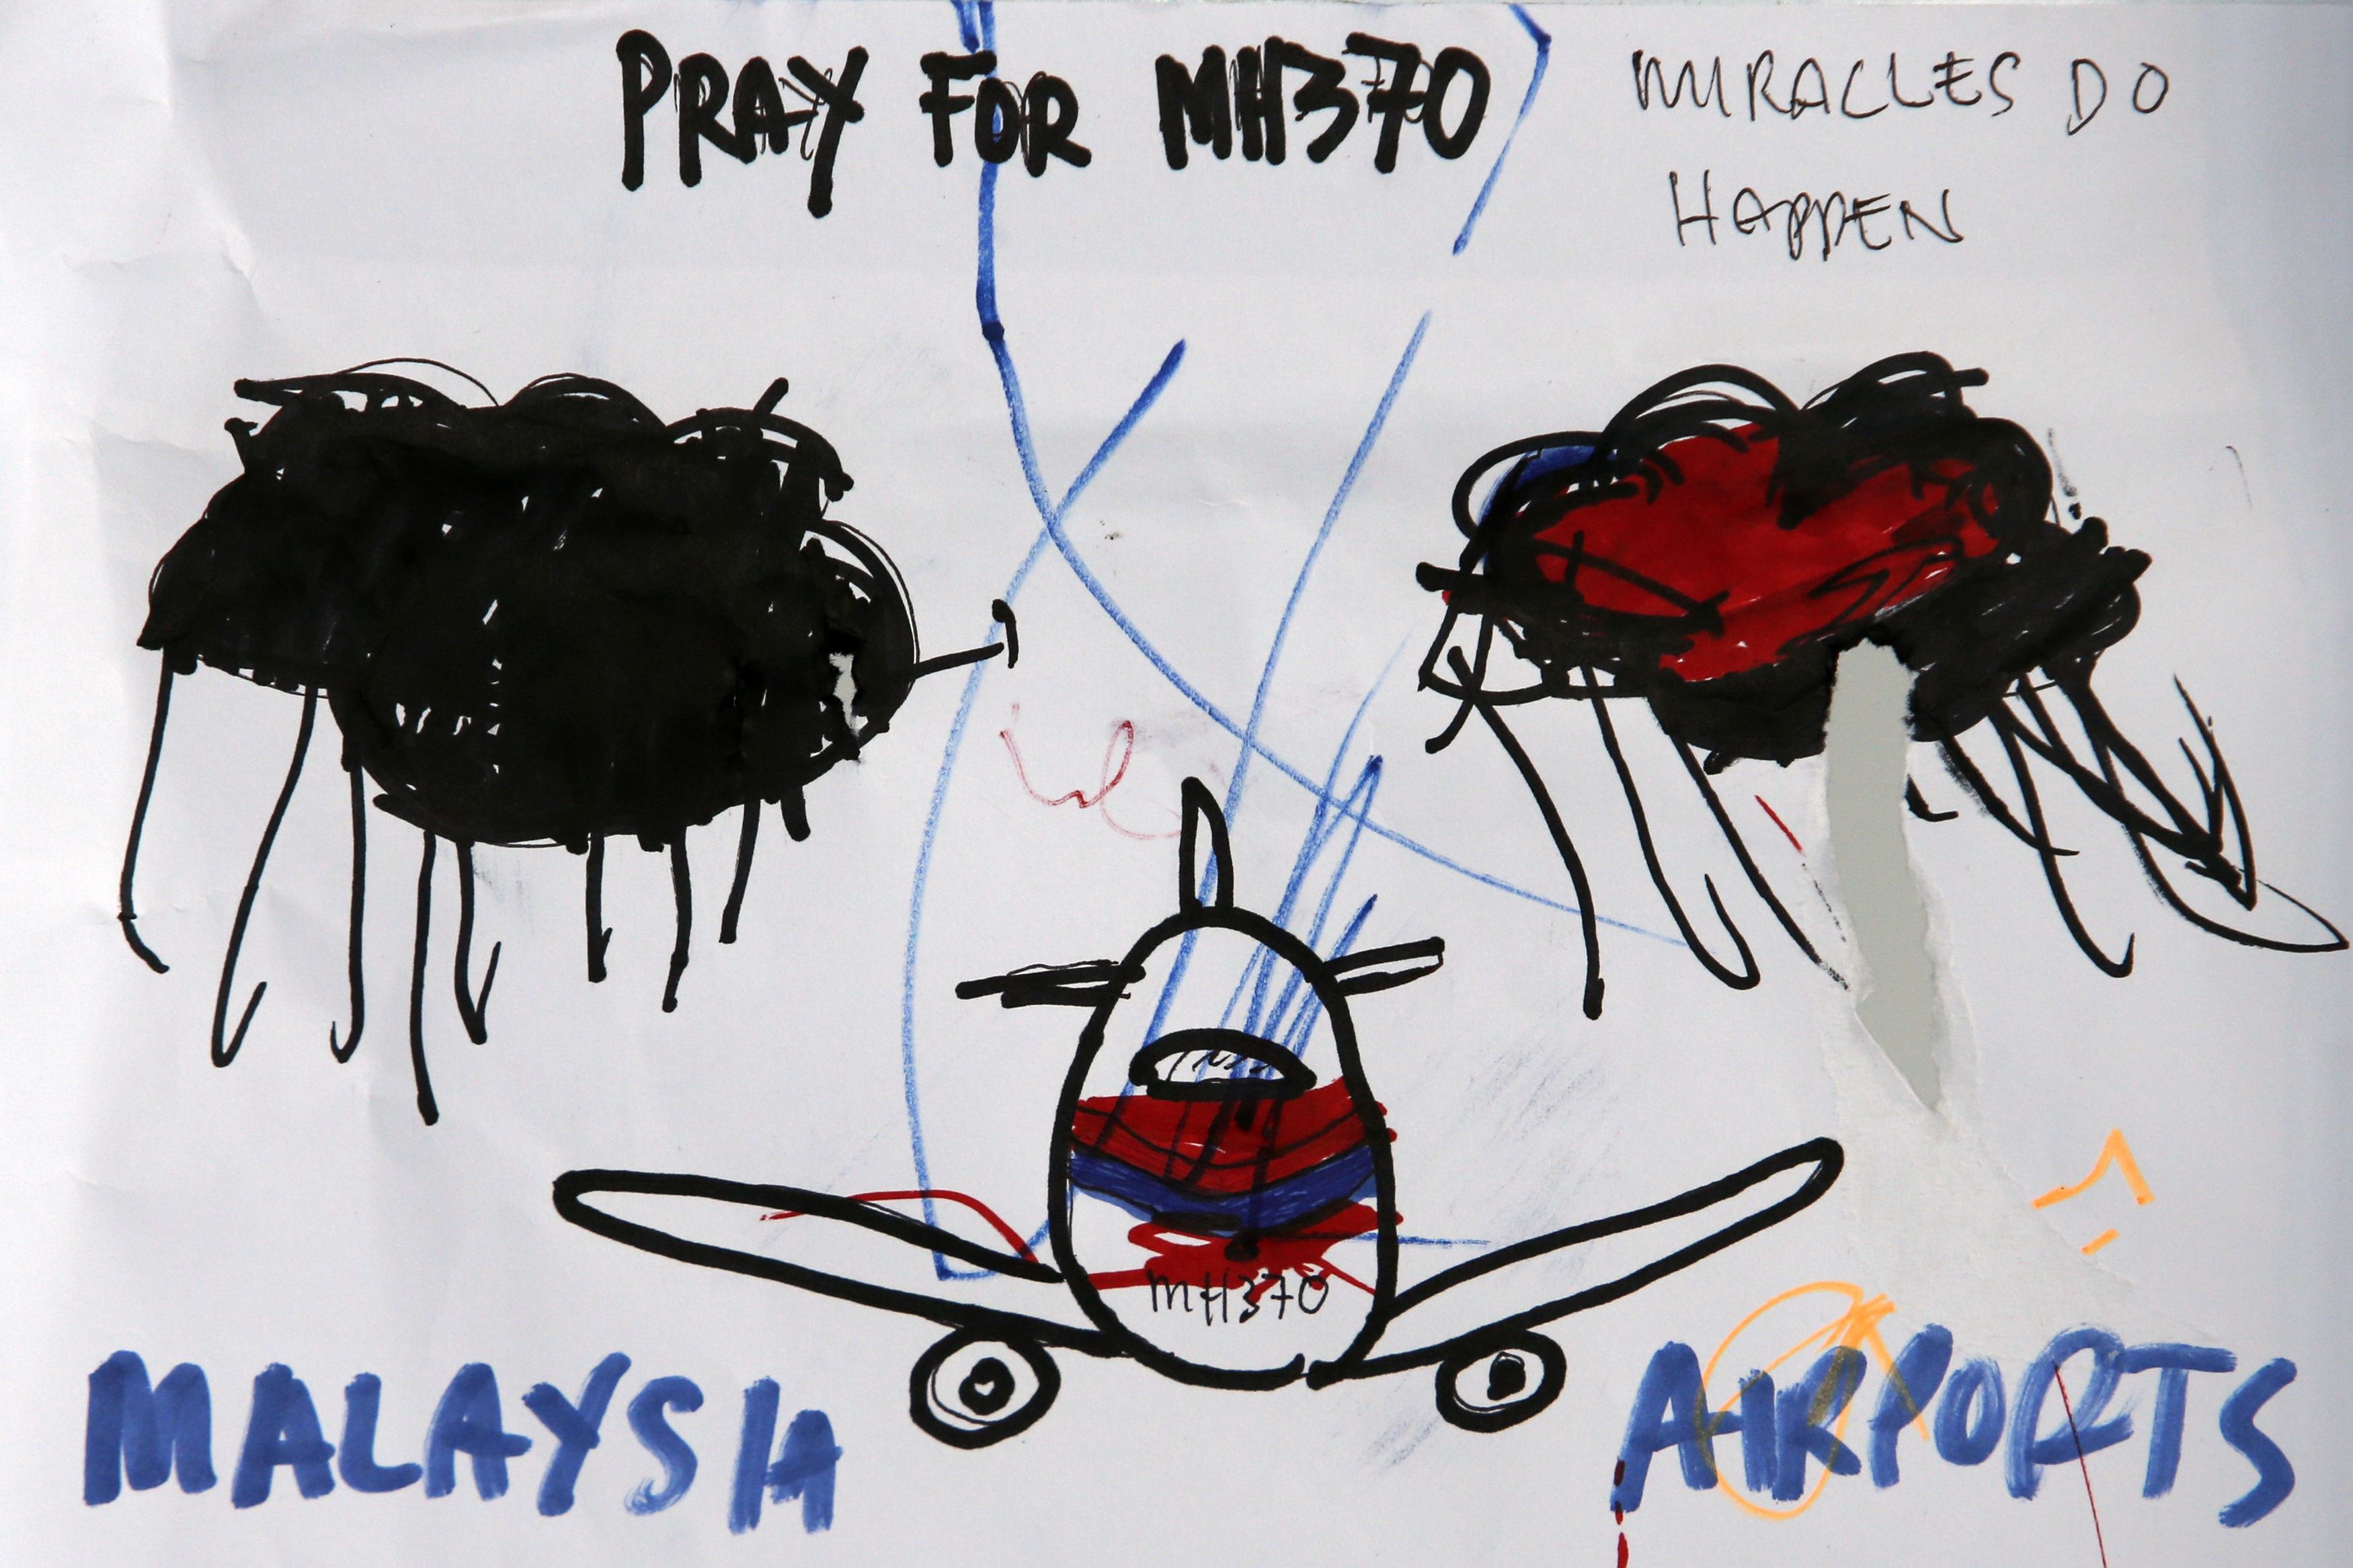 Children's artworks hoping for the safe return of Flight MH370's passengers and crew are seen hanging at Kuala Lumpur International Airport, March 19, 2014.